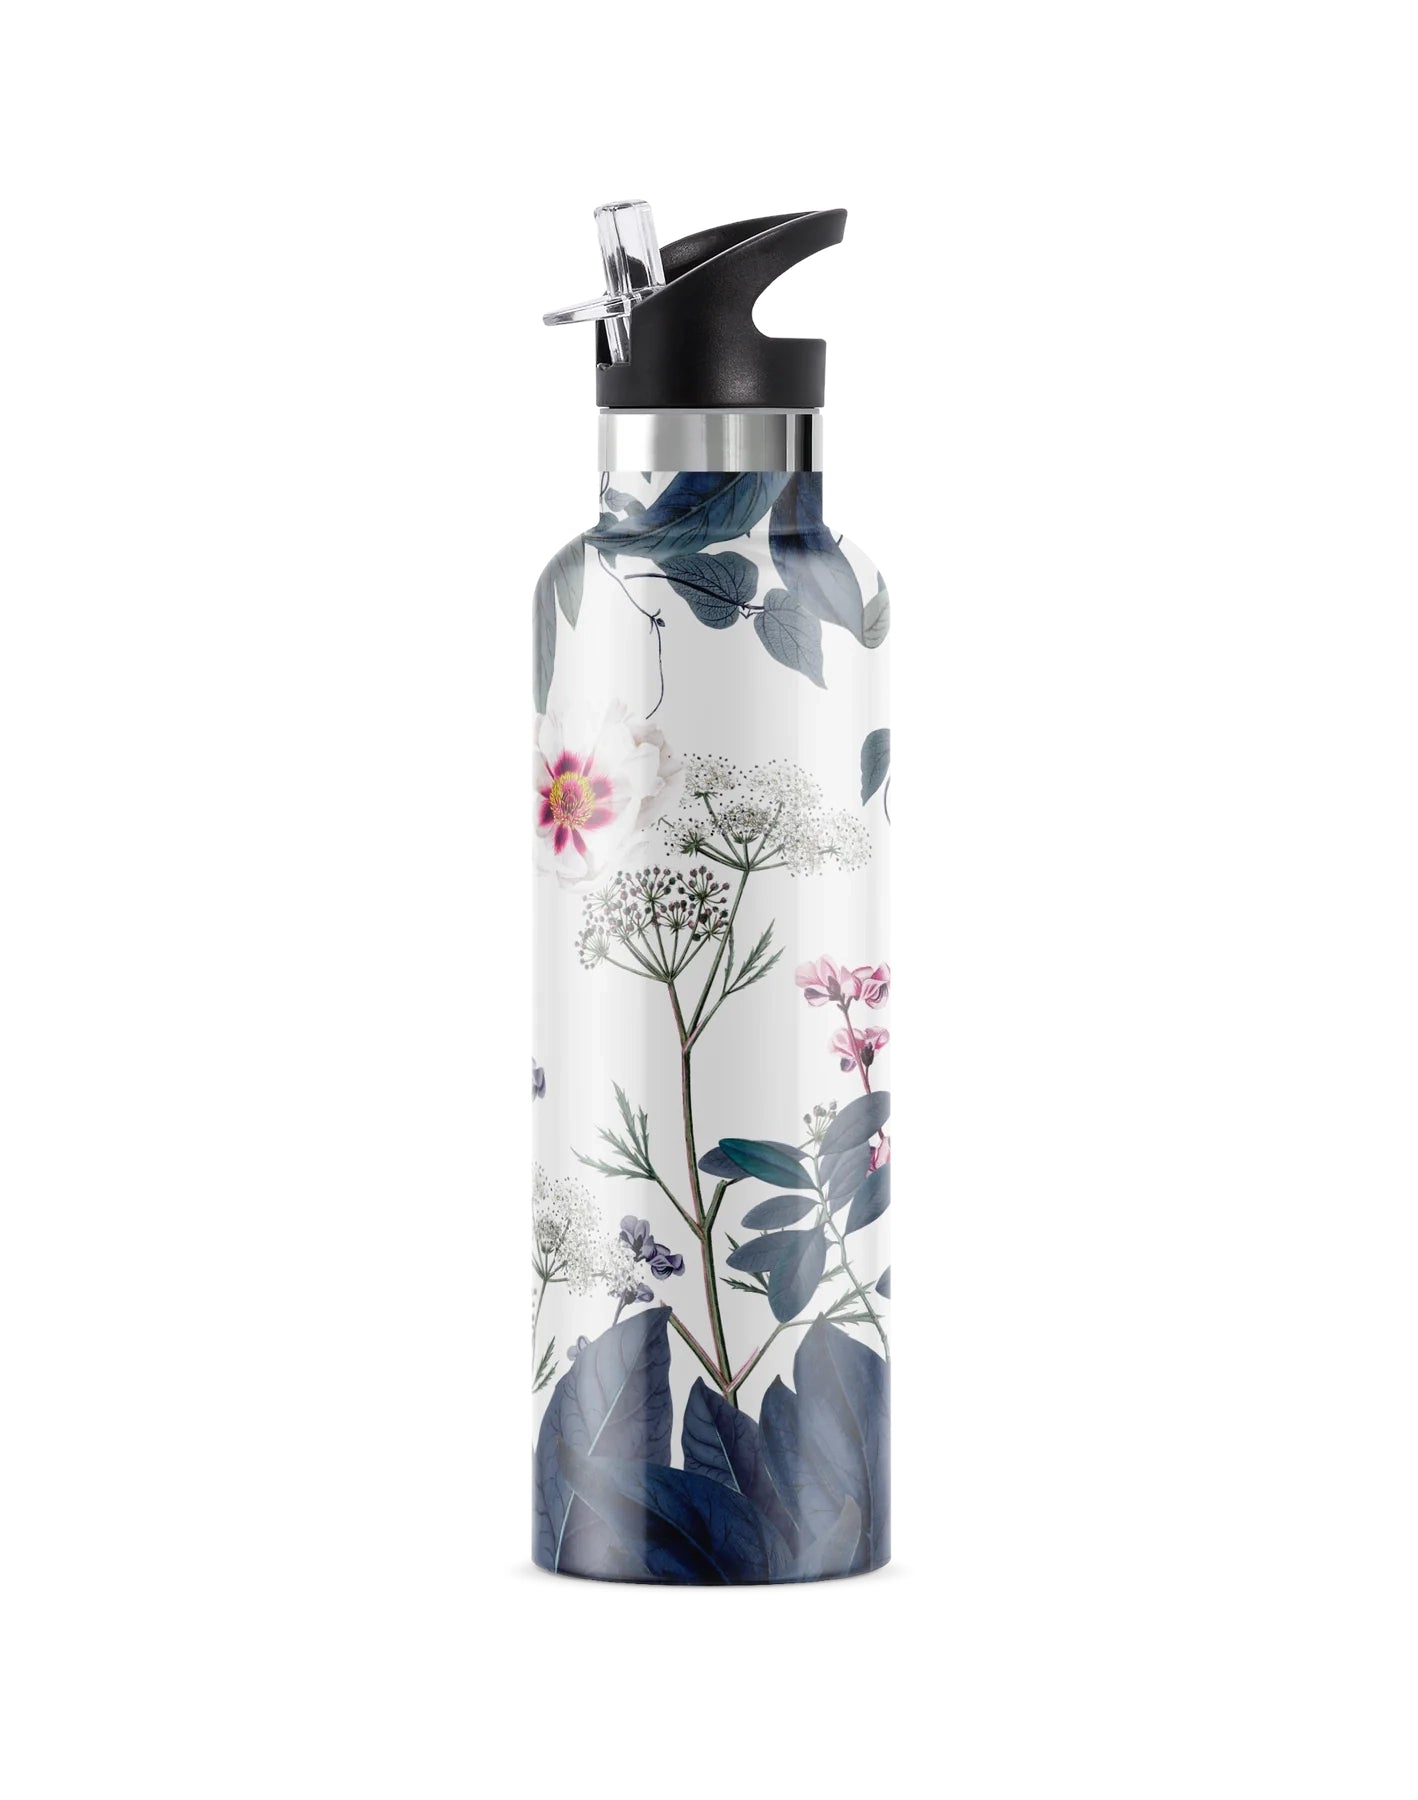 Peony 25oz. Insulated Water Bottle by My Bougie Bottle